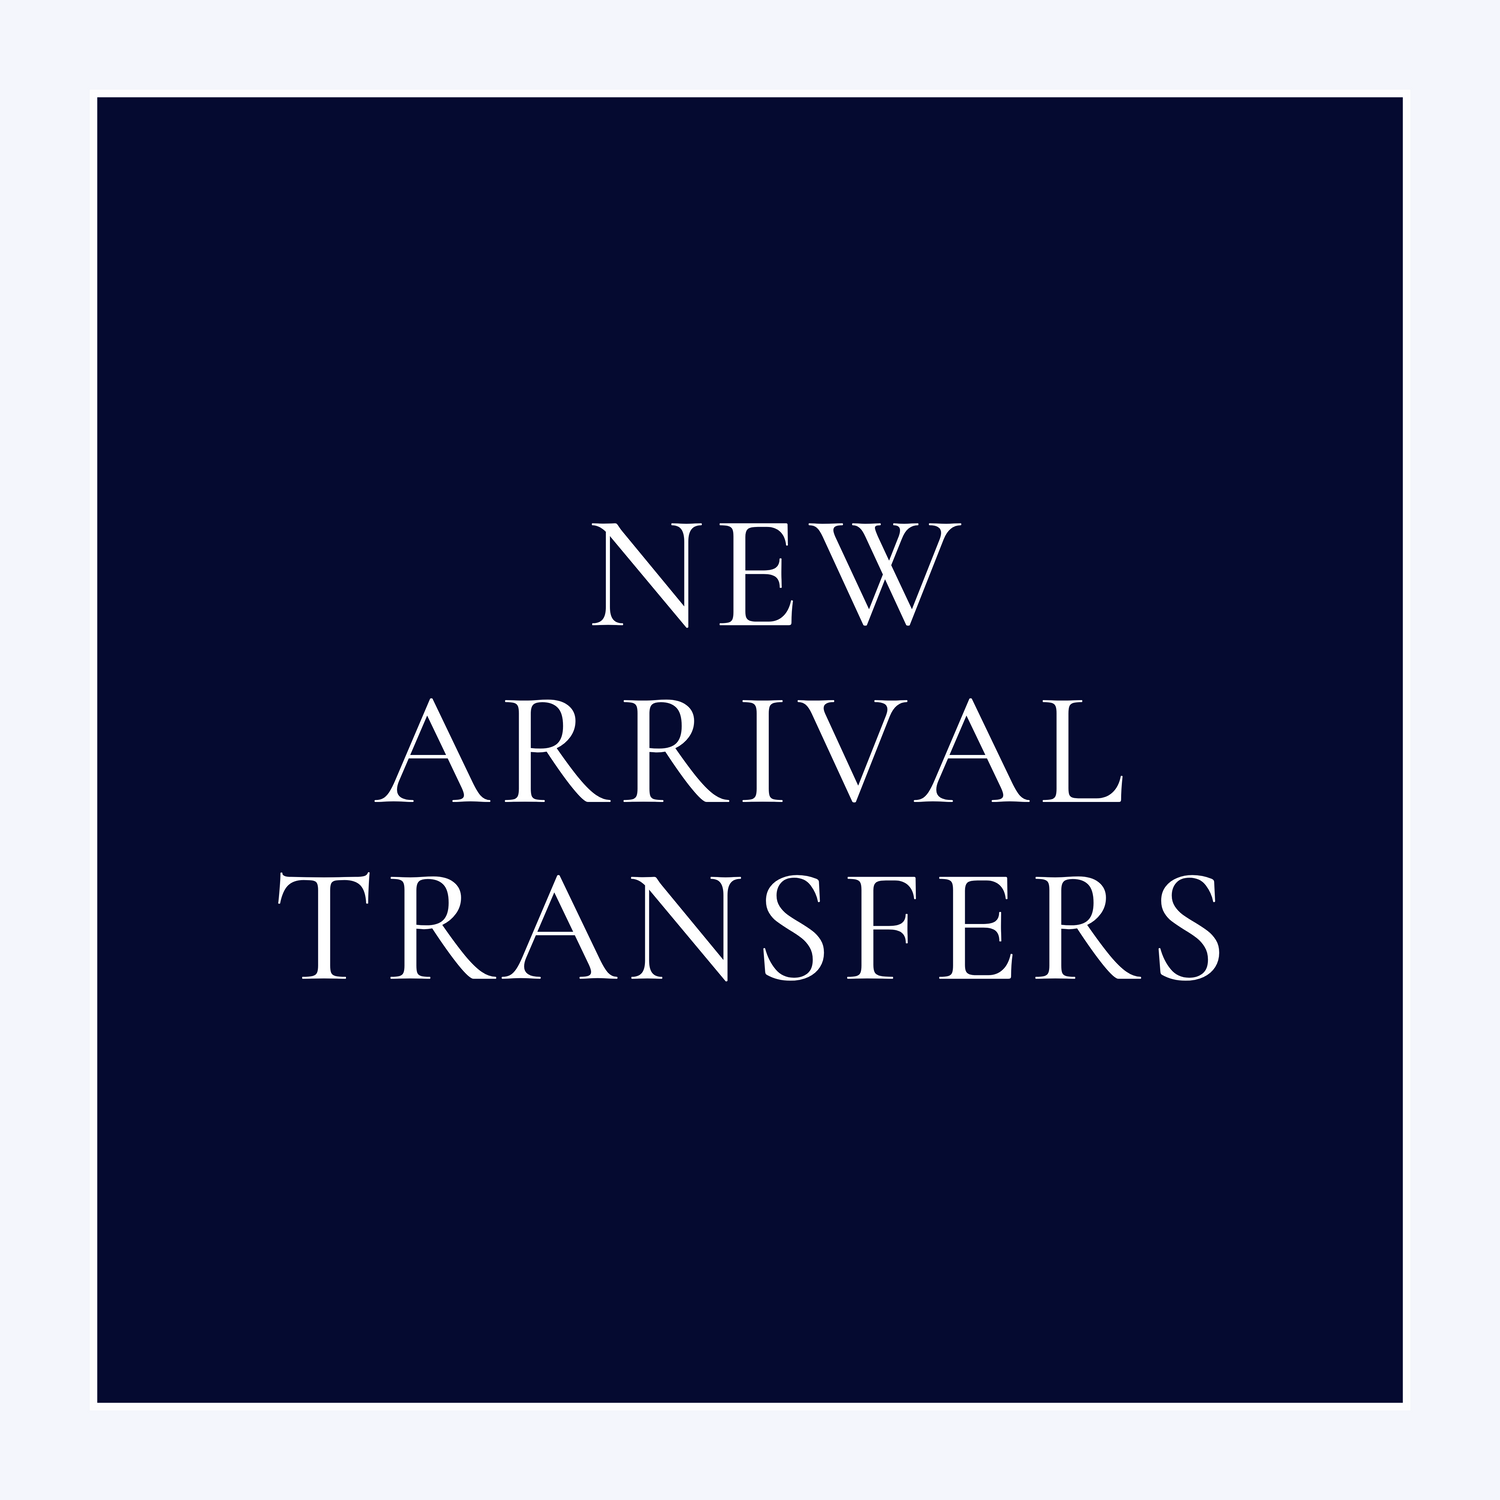 New Arrivals Transfers